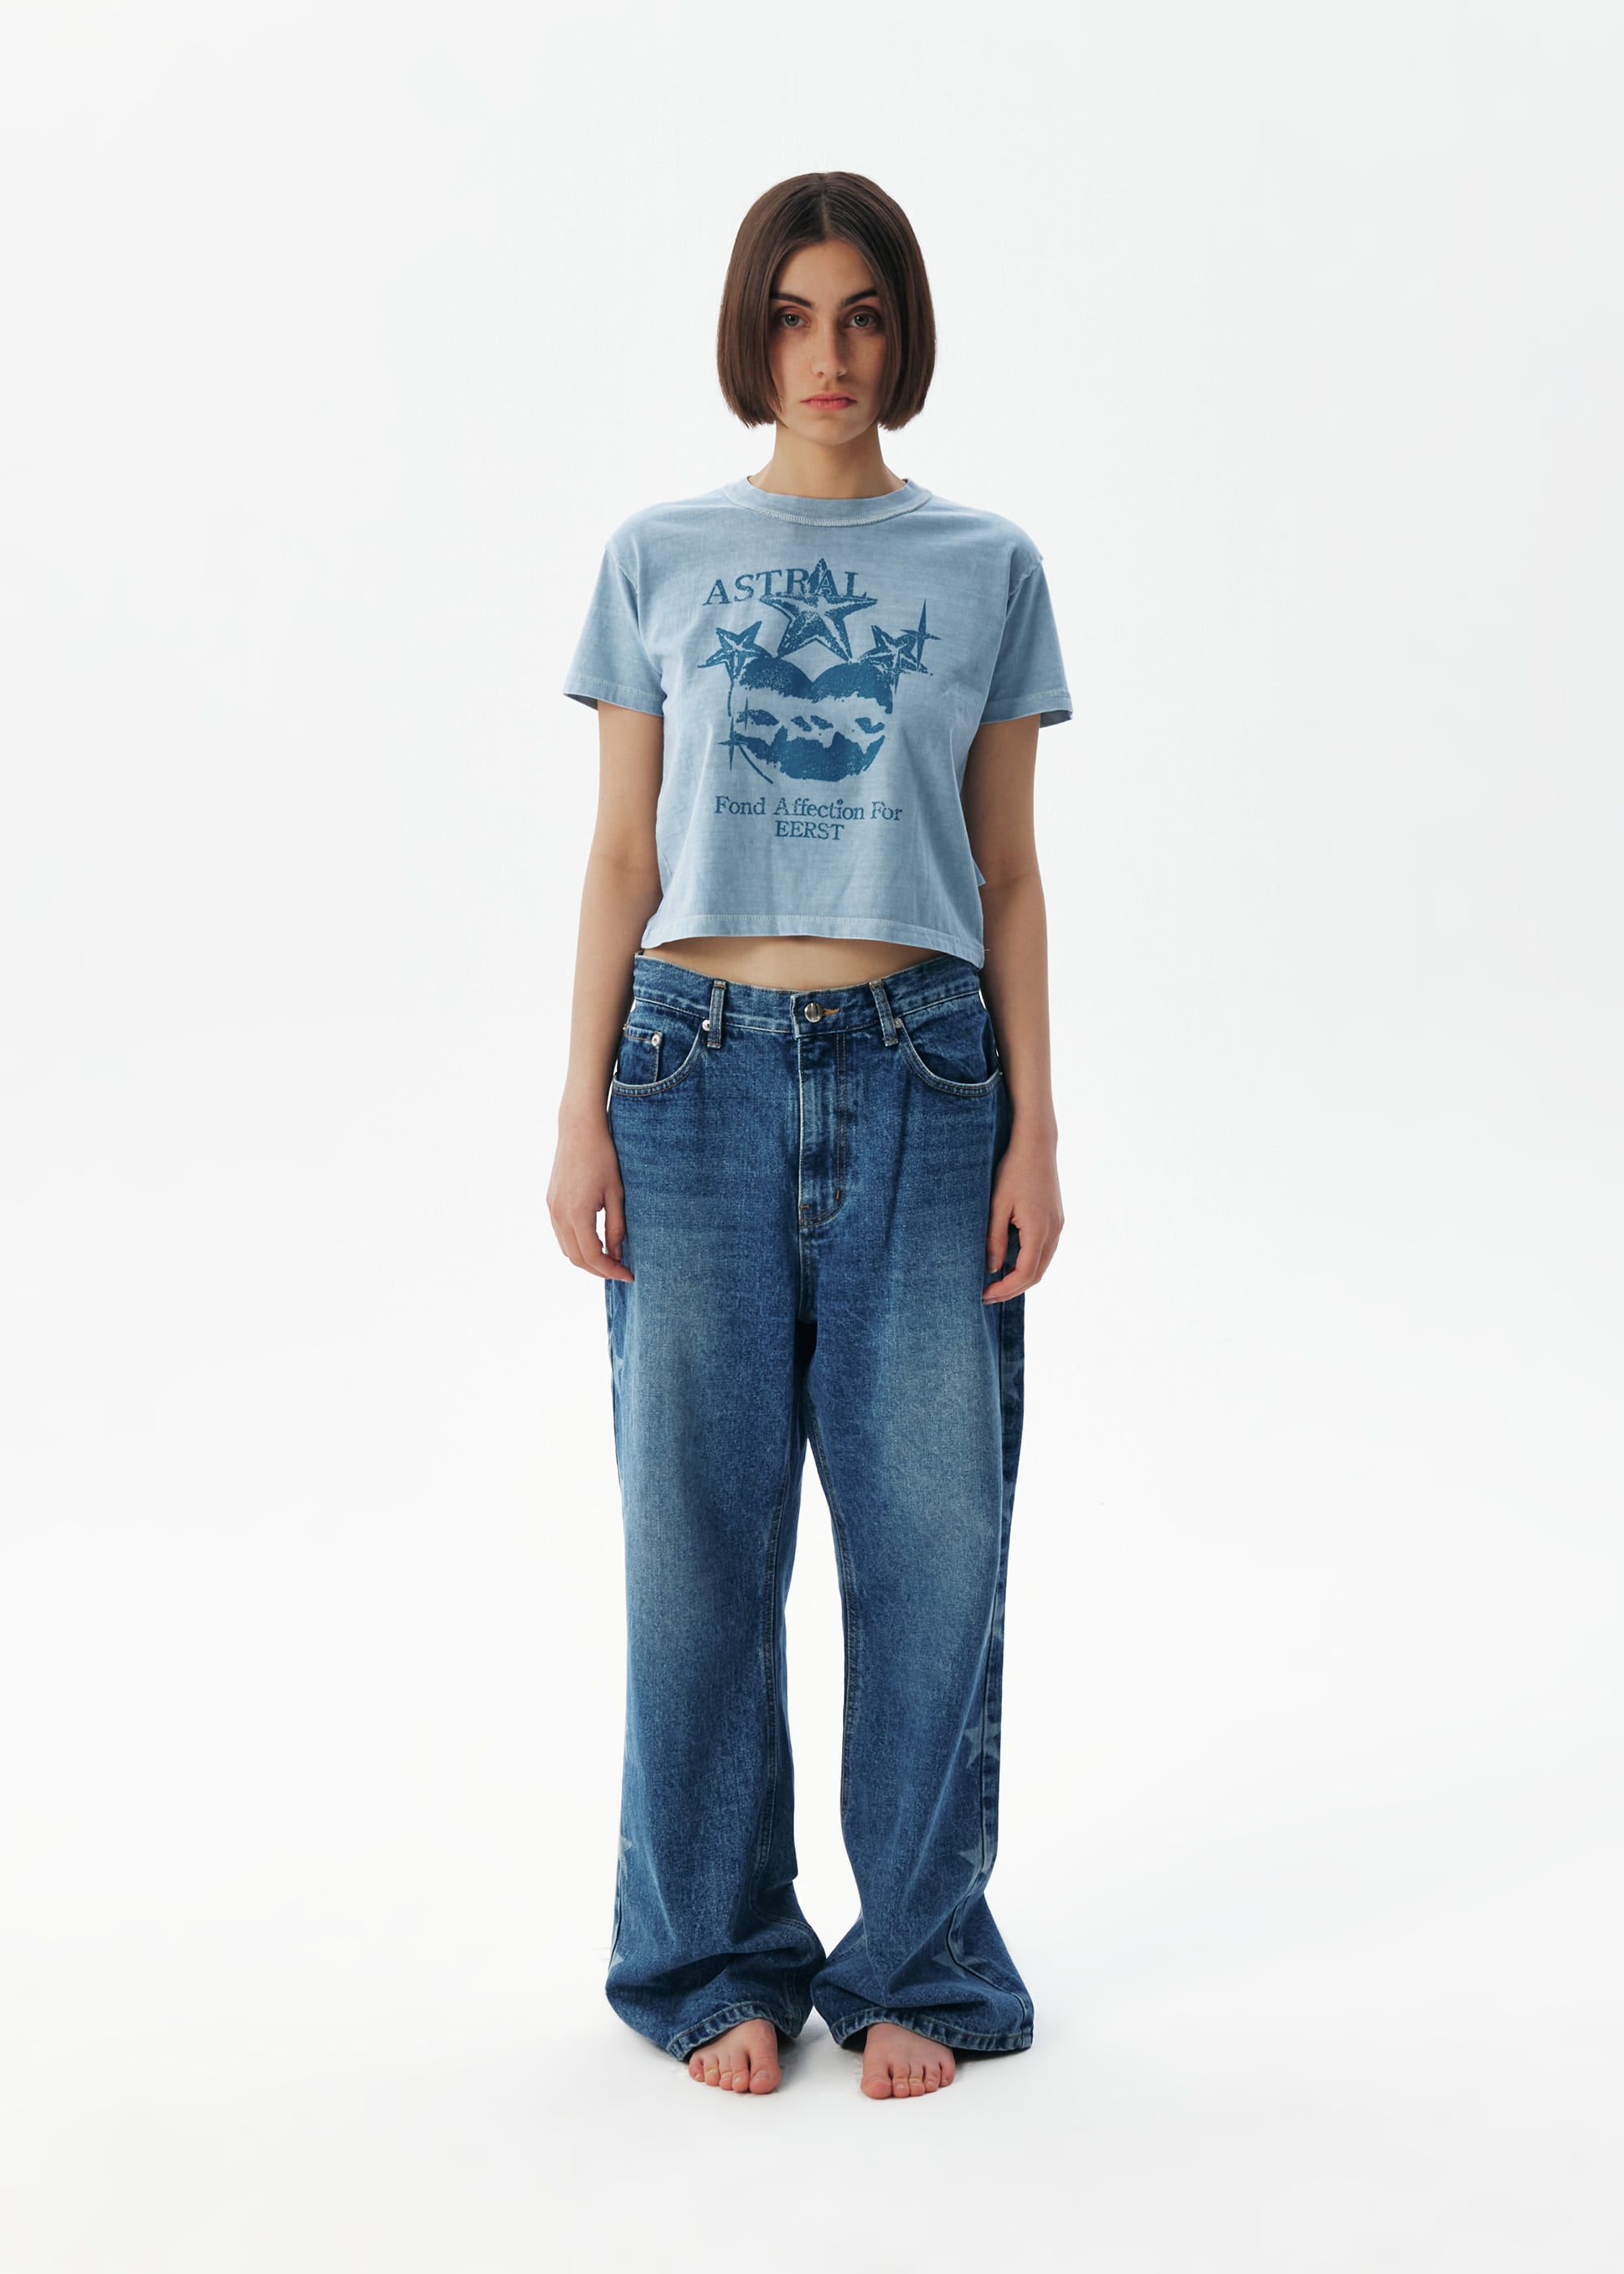 Astral T-shirt [Washed Blue]